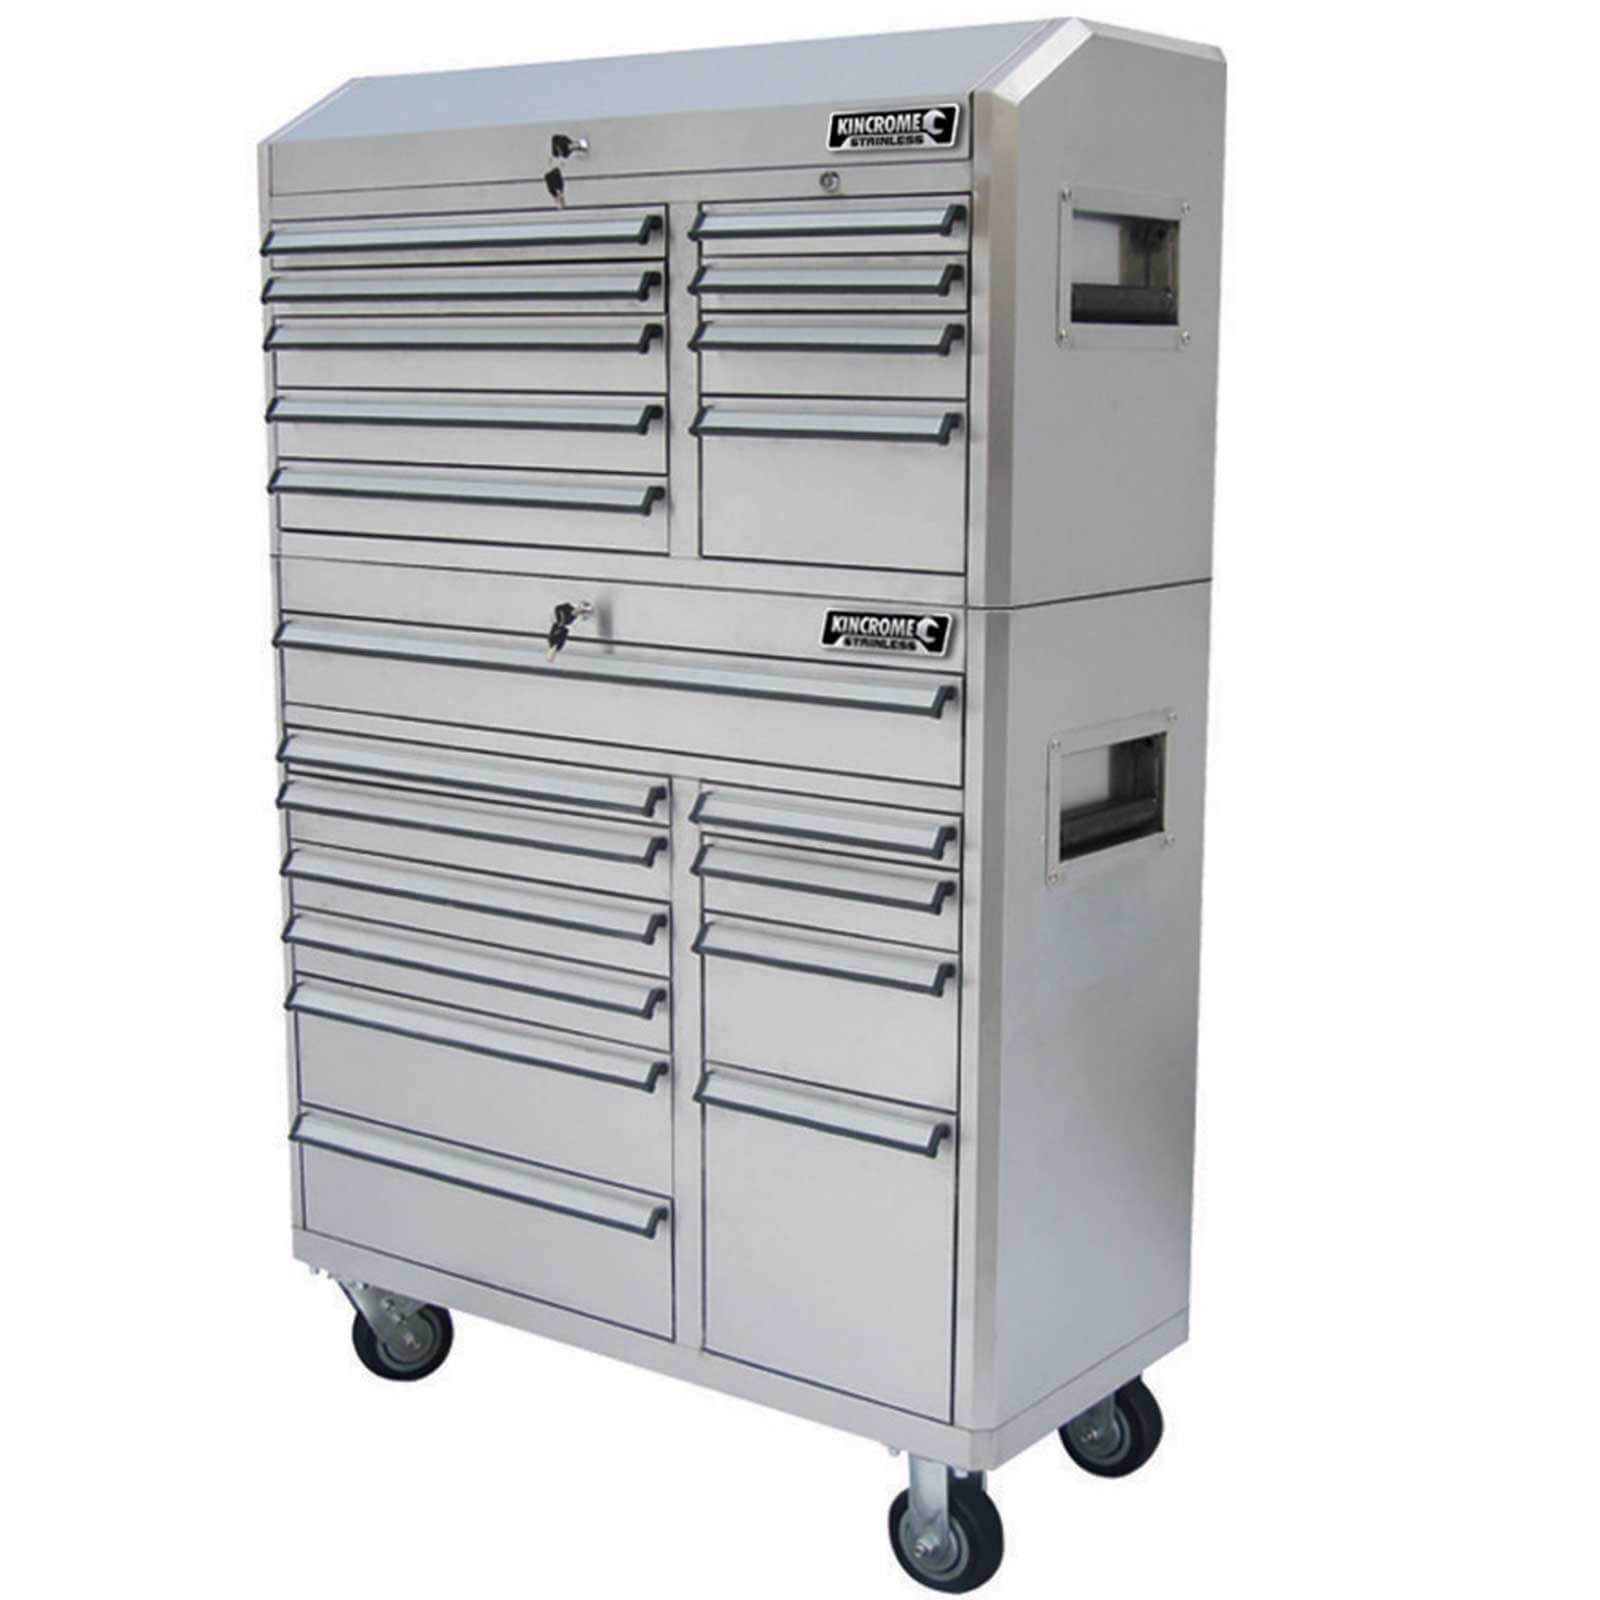 Kincrome Heavy Duty Roller Cabinet And Tool Chest Stainless Steel